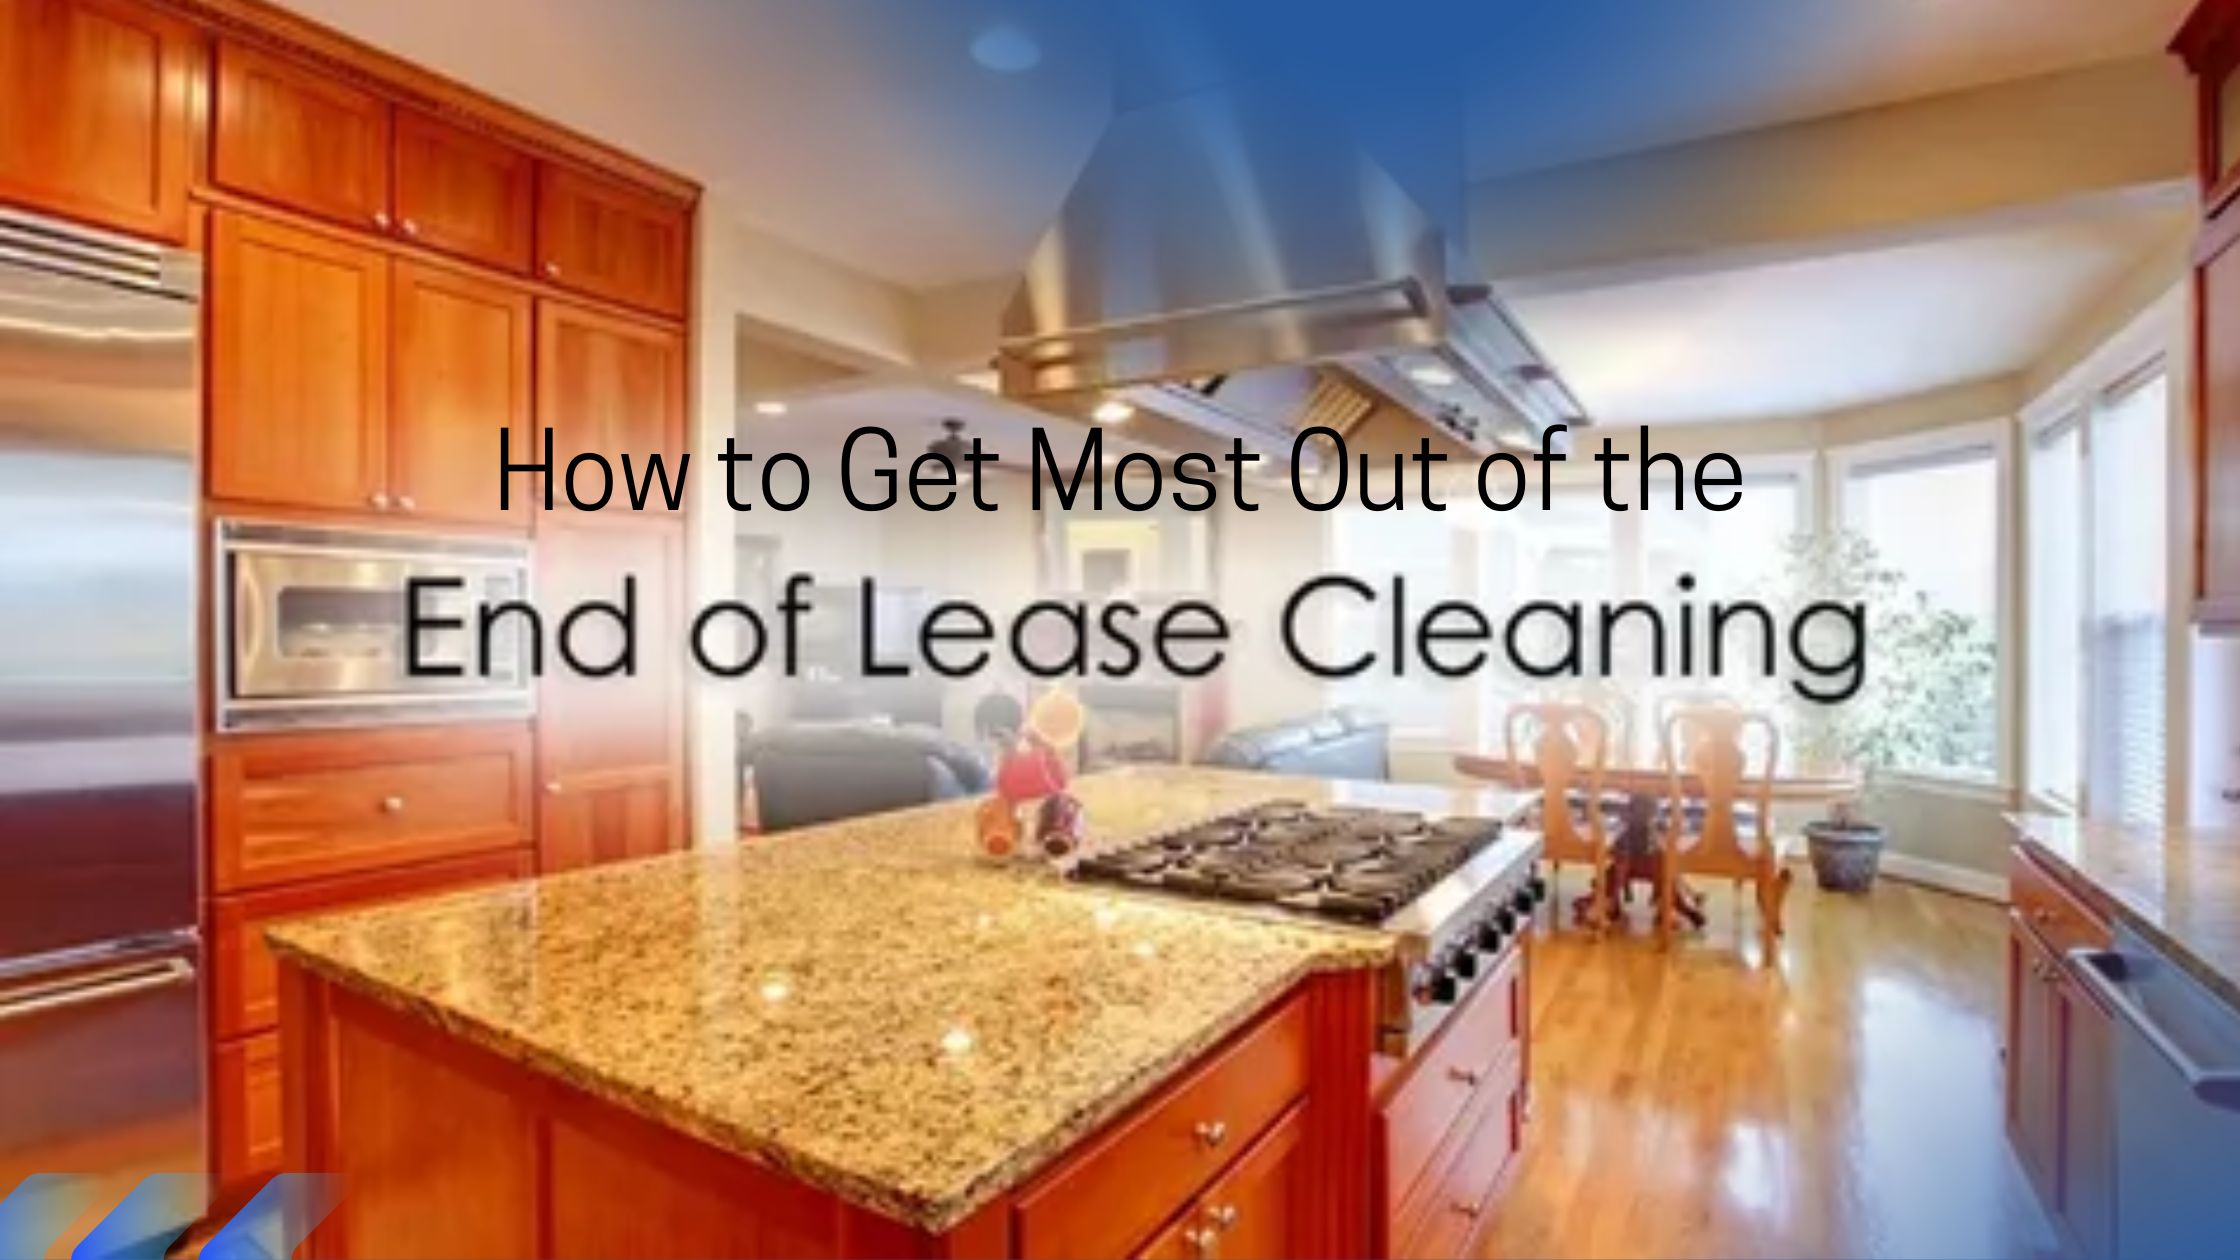 How to Get Most Out of the End of lease cleaning?